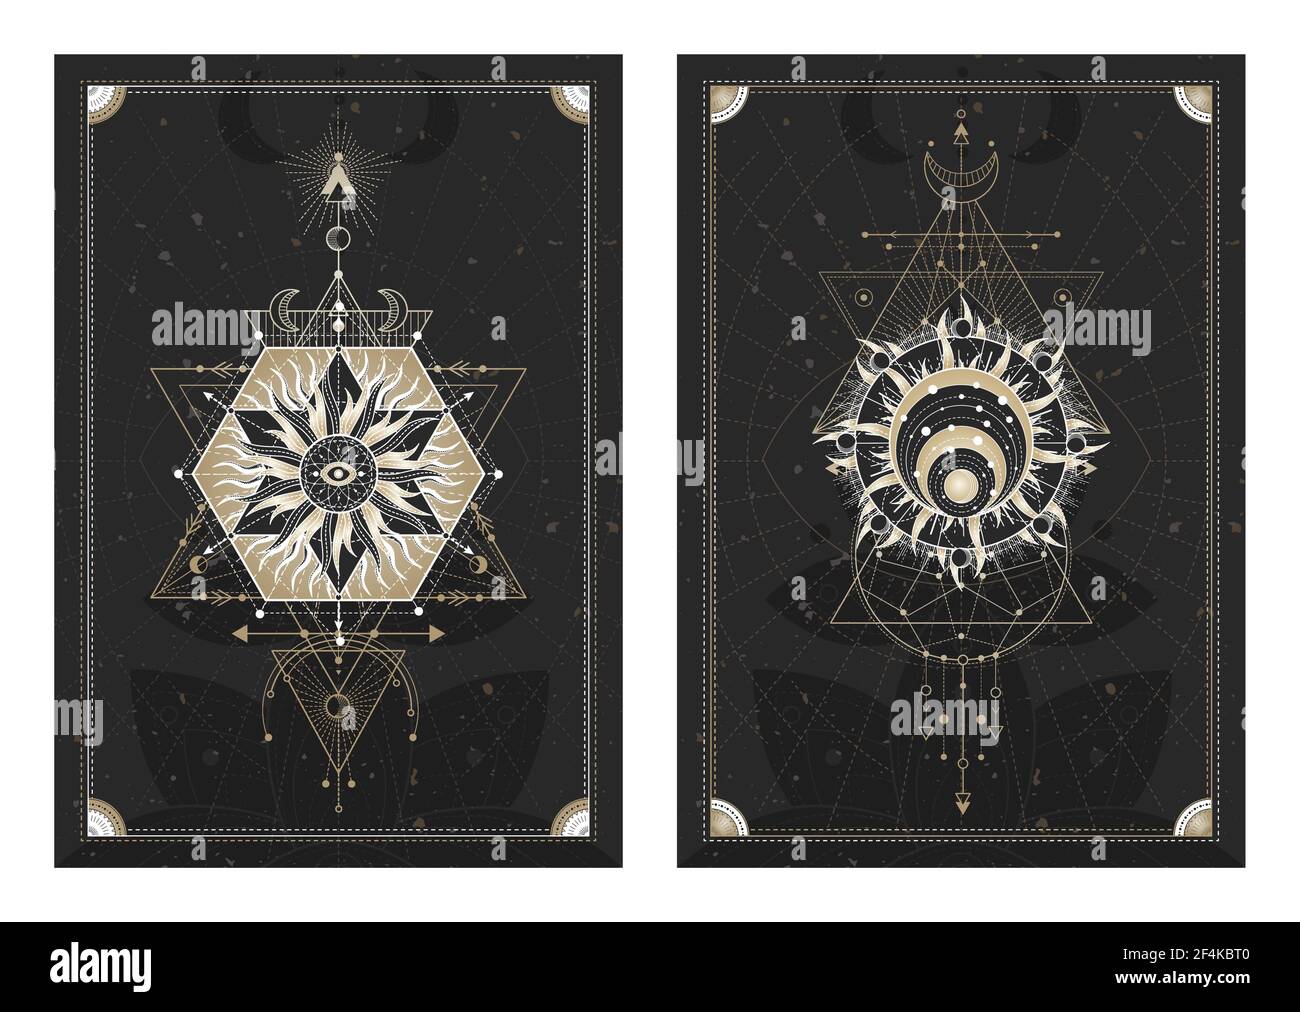 Vector dark illustrations with sacred geometry symbols, grunge textures and frames. Images in black, white and gold., Vector dark illustrations with s Stock Vector